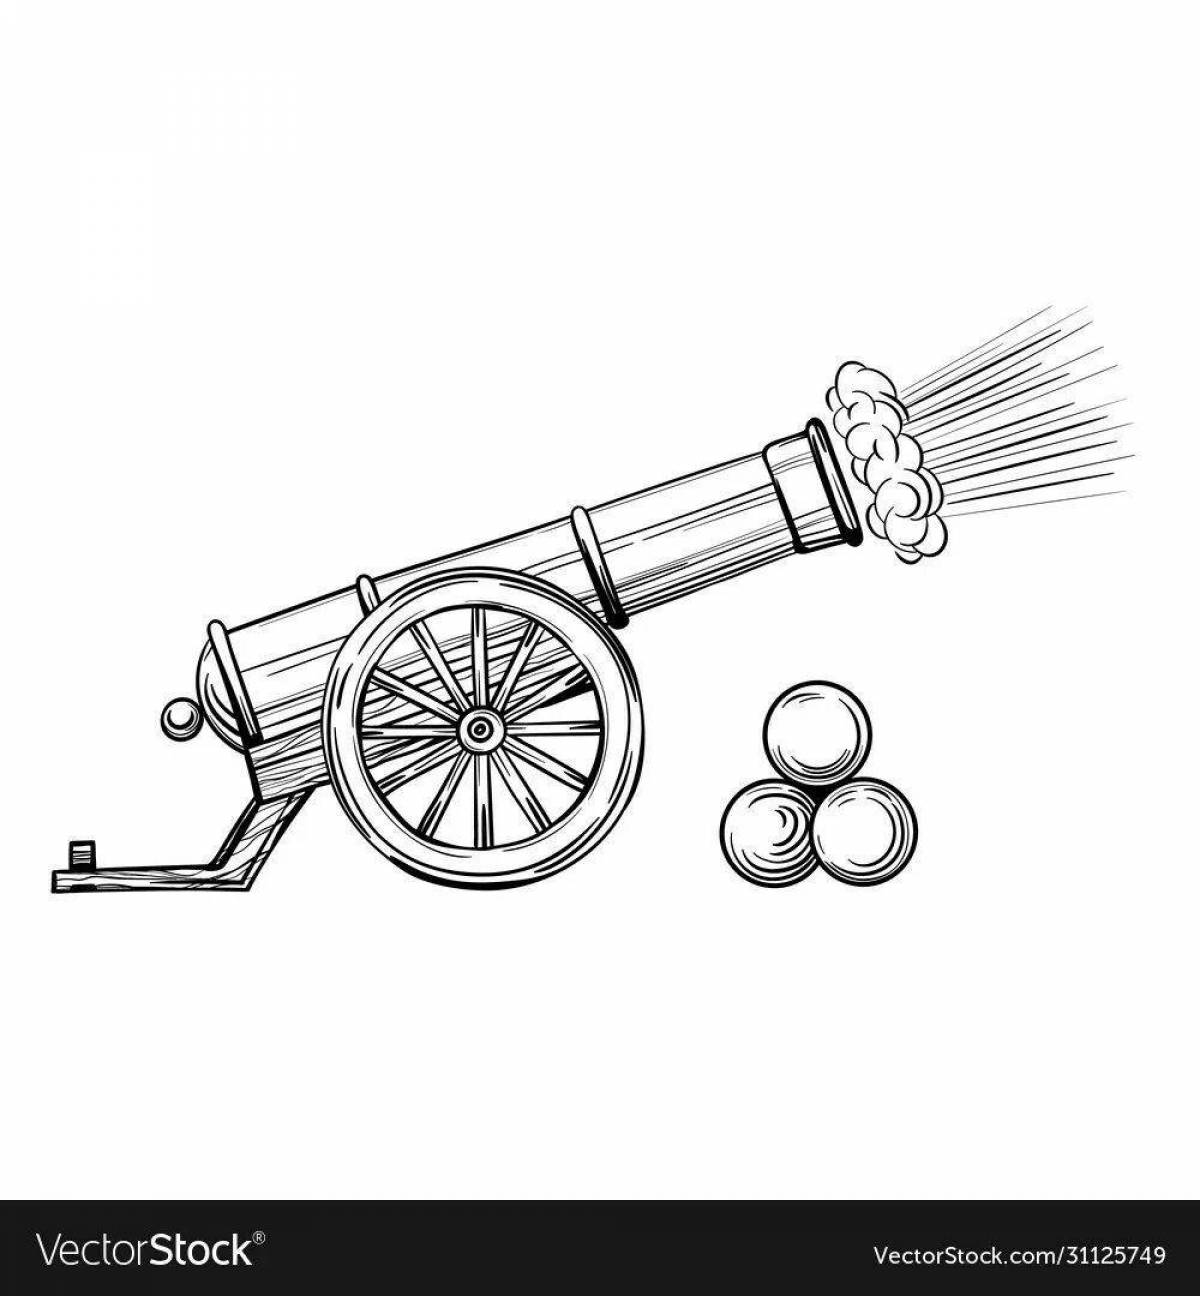 Glorious tsar cannon coloring page